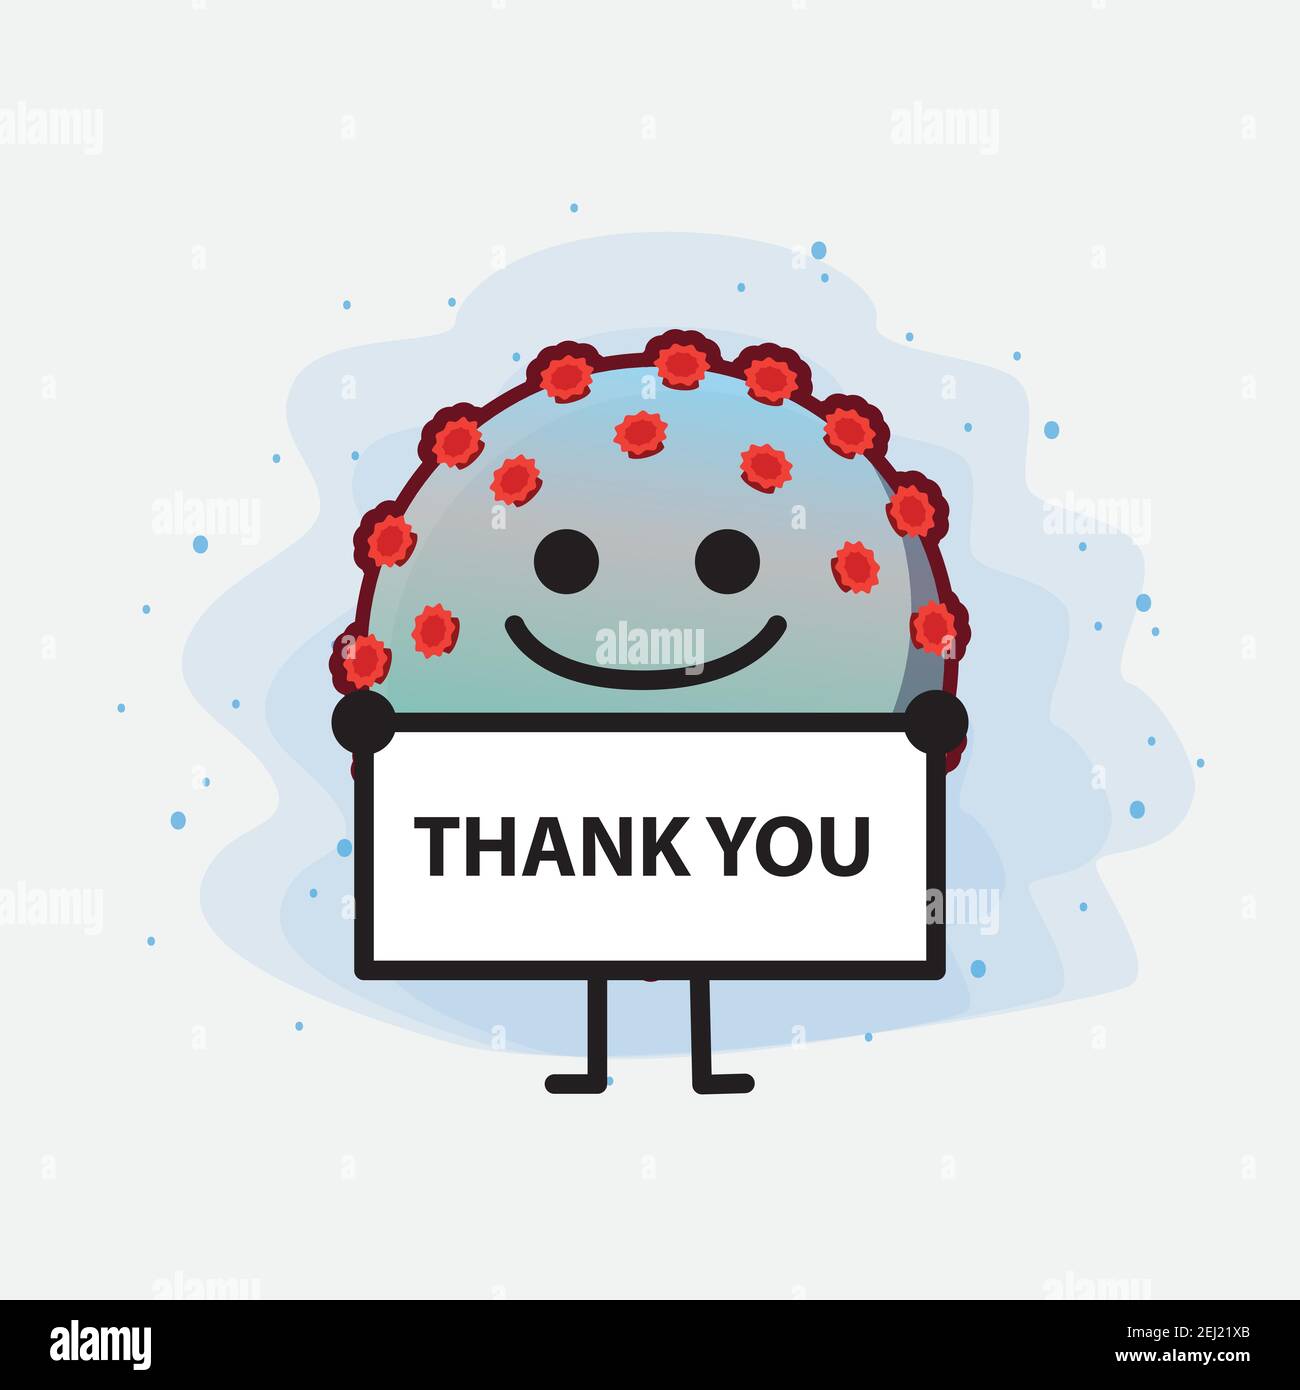 Vector Illustration of Corona Virus Character with cute face ...